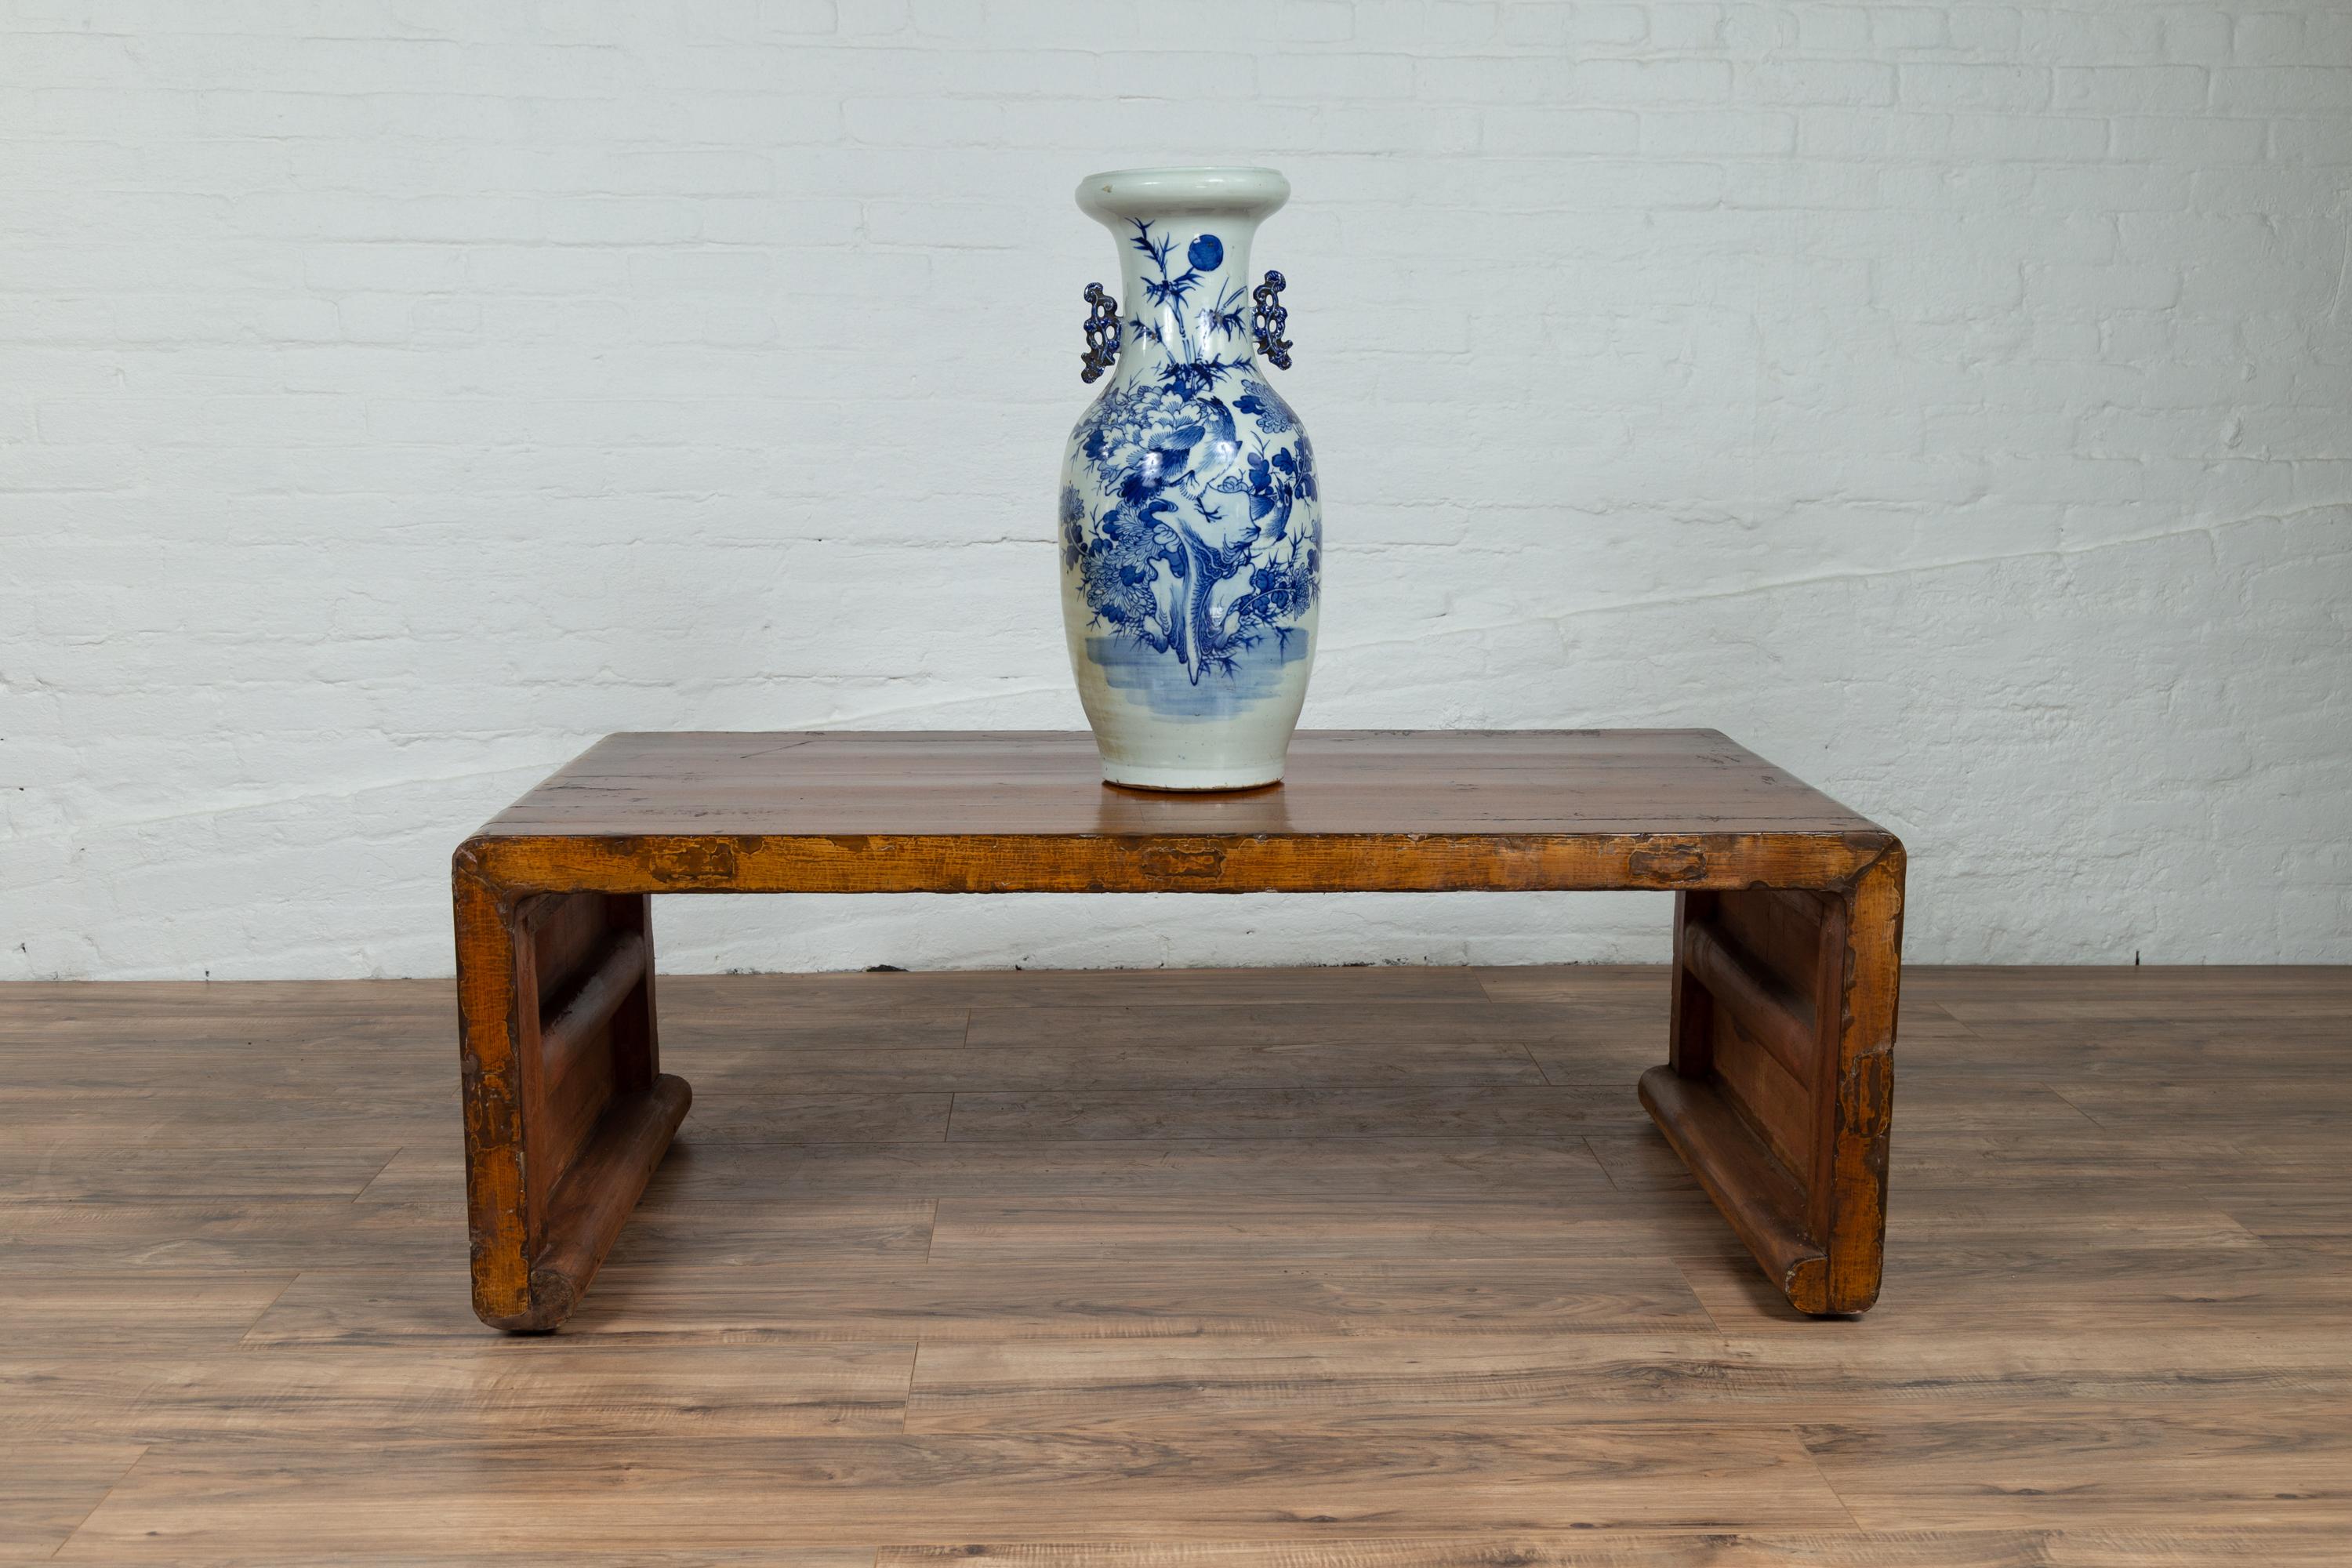 A Chinese antique waterfall coffee table from the early 20th century, with lacquered patina and scroll terminations. Found in Southern China, this waterfall table features a rectangular top raised on solid board legs with scrolled accents. The grand